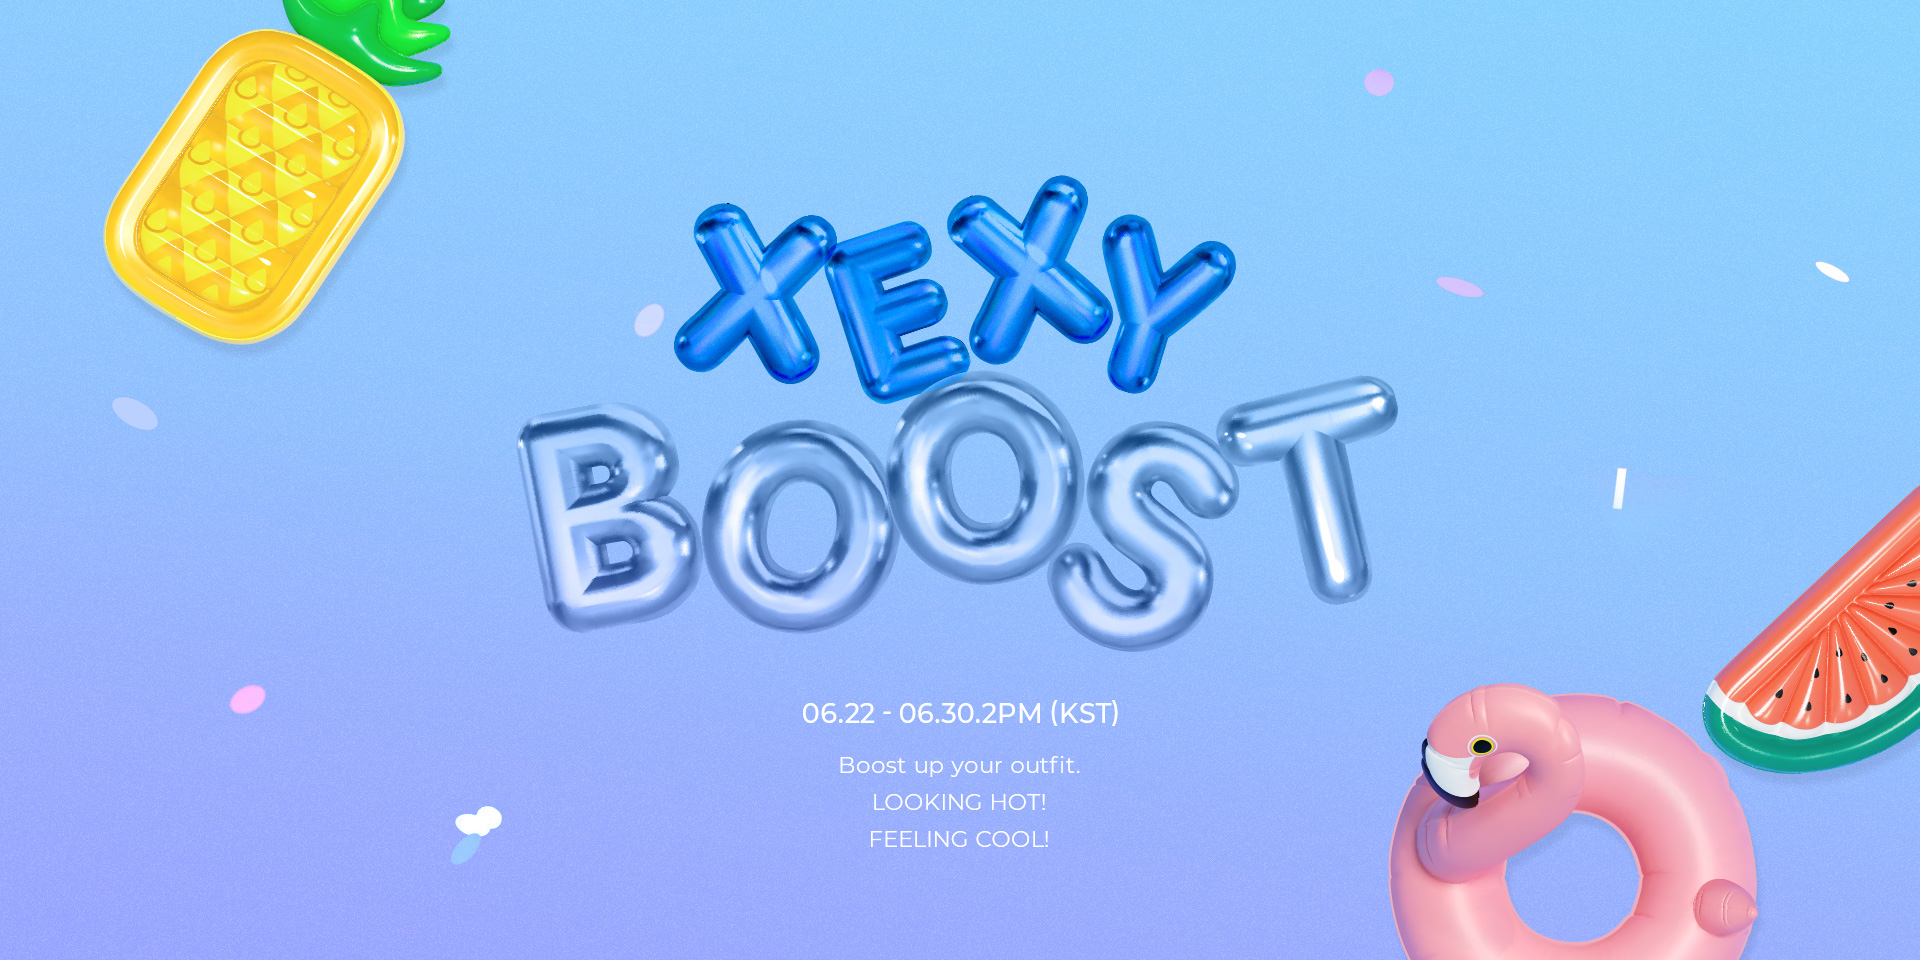 xexyboost banner